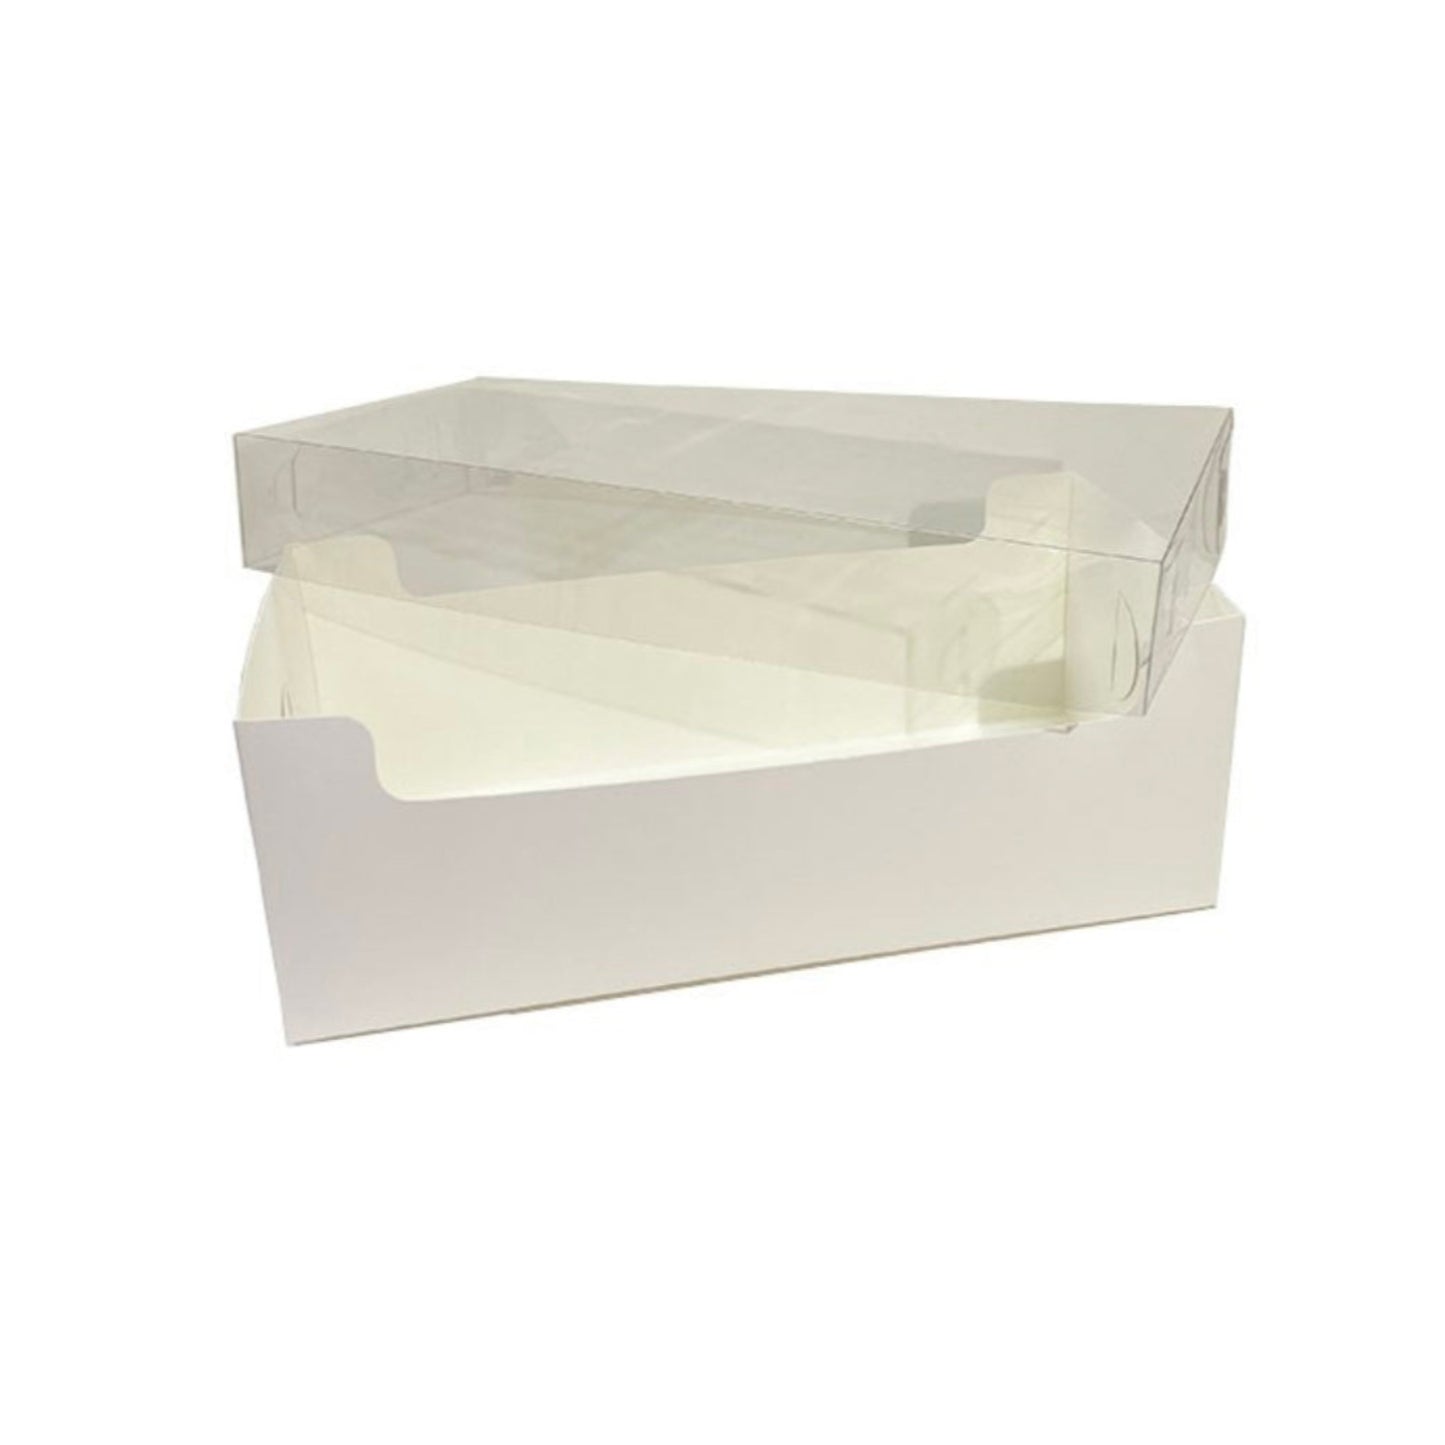 Set of 5 box's with Transparent top for Swiss roll